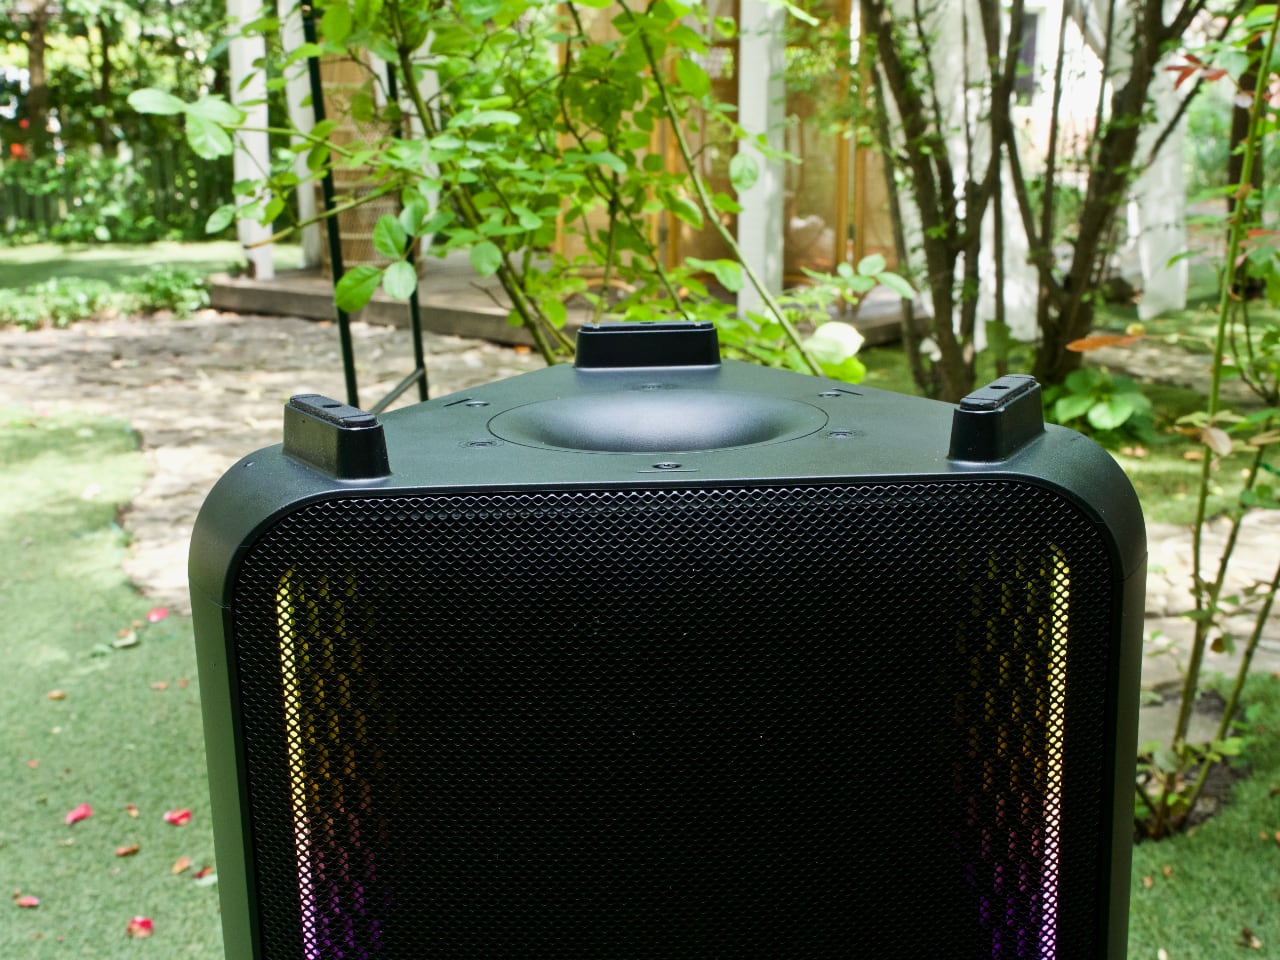 King of the vibe: Samsung Sound Tower MX-ST50B heavy-duty speaker with built-in battery and LED backlight review-31